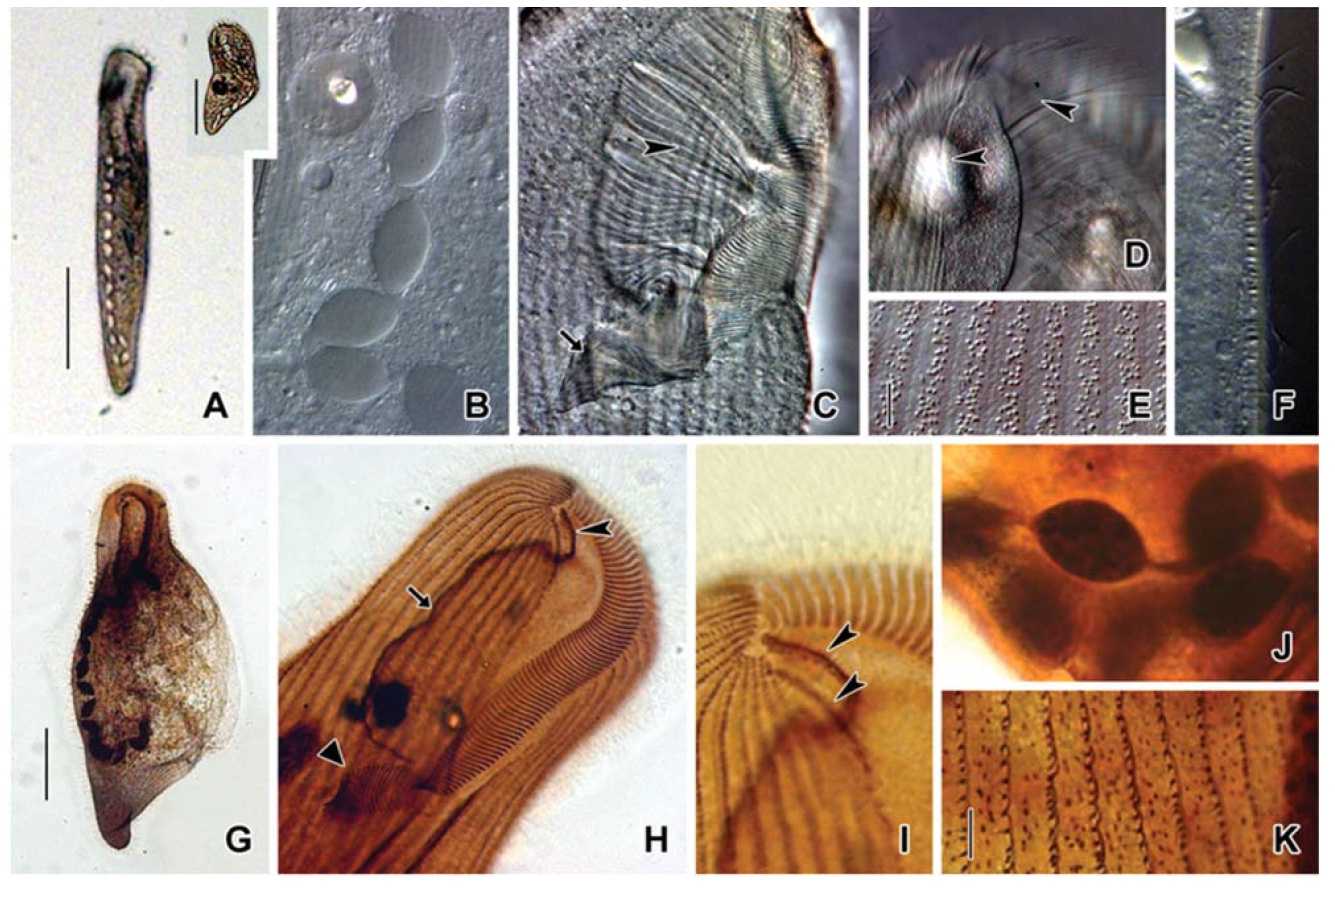 Microphotographs of Condylostoma spatiosum from live specimens (A-F) and after protargol impregnation (G-K). A, Ventral side view; B, Moniliform macronuclear nodules; C, Buccal field to indicate the stripes of inner wall (arrowhead) and the cytopharynx (arrow); D, Location of frontal cirri (arrowheads); E, Pattern of cortical granules; F, Lateral view of cortical granules; G, Ventral side view in impregnated specimen; H, Ventral view of frontal cirri (arrowhead), paroral membrane (arrow) and cytopharynx (triangular arrowhead); I, Location of frontal cirri (arrowheads); J, Macronuclear nodules and threads; K, Cortical granules in impregnated specimen. Scale bars: A=200 μm, Inset in A=200 μm, E, K=5 μm, G=100 μm.